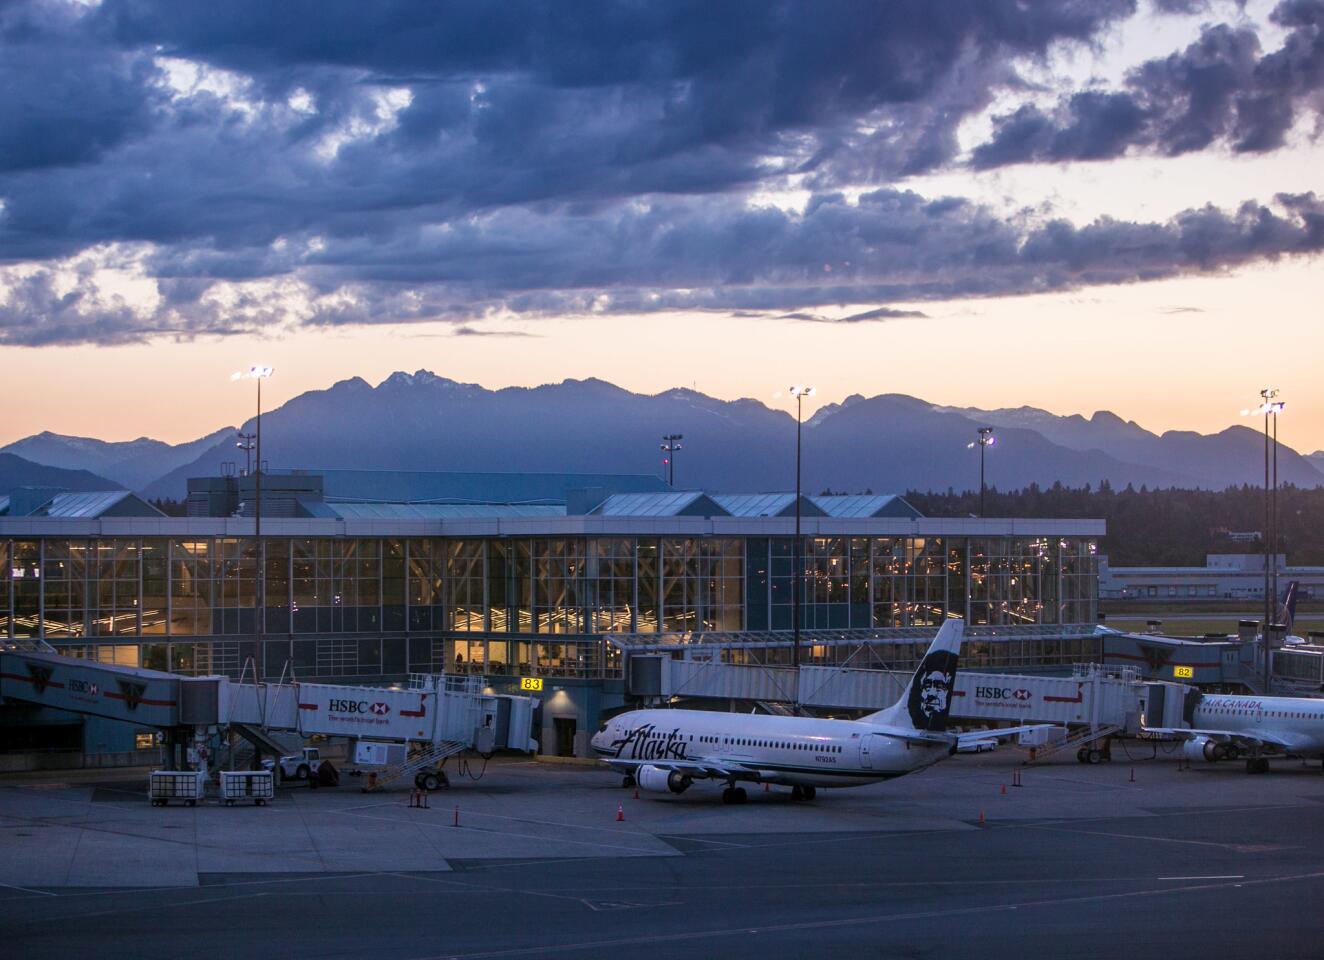 Vancouver International Airport, Canada (YVR)